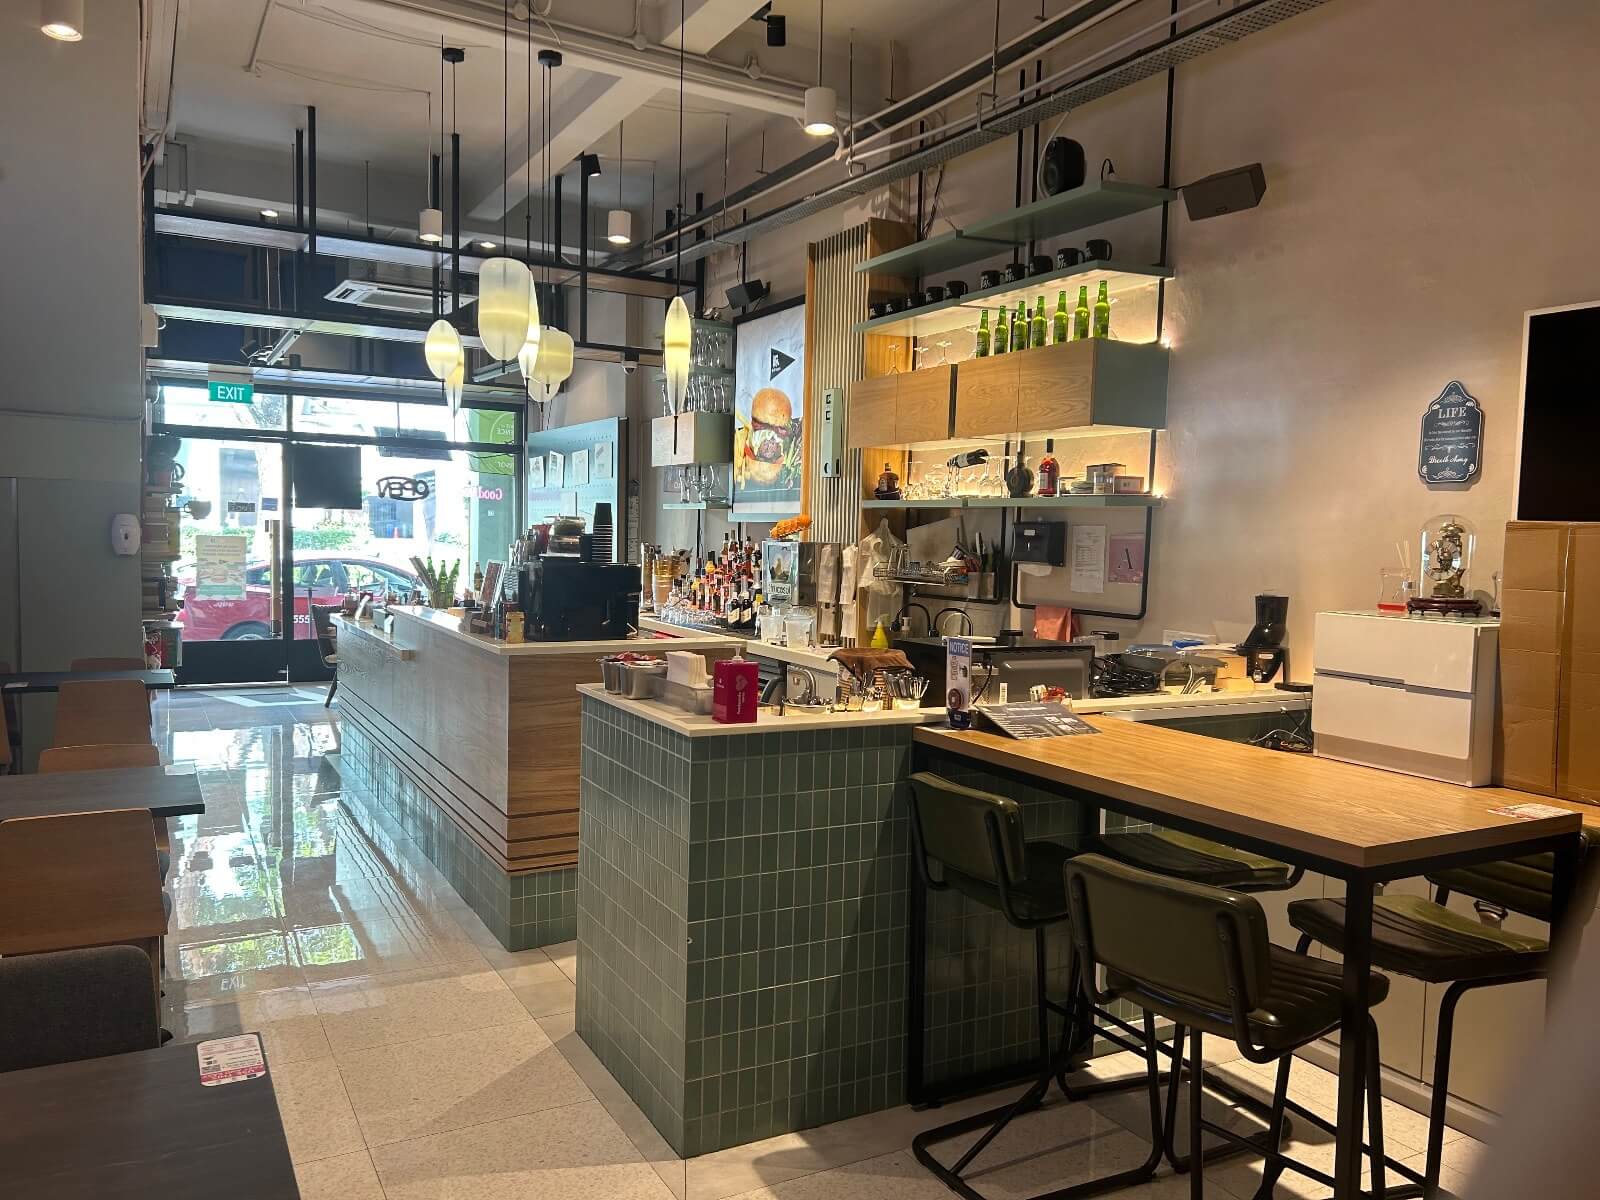 Profitable cafe with 2 storeys(2600sqft) + 2 income streams + CBD location(Rental lowest in market)!